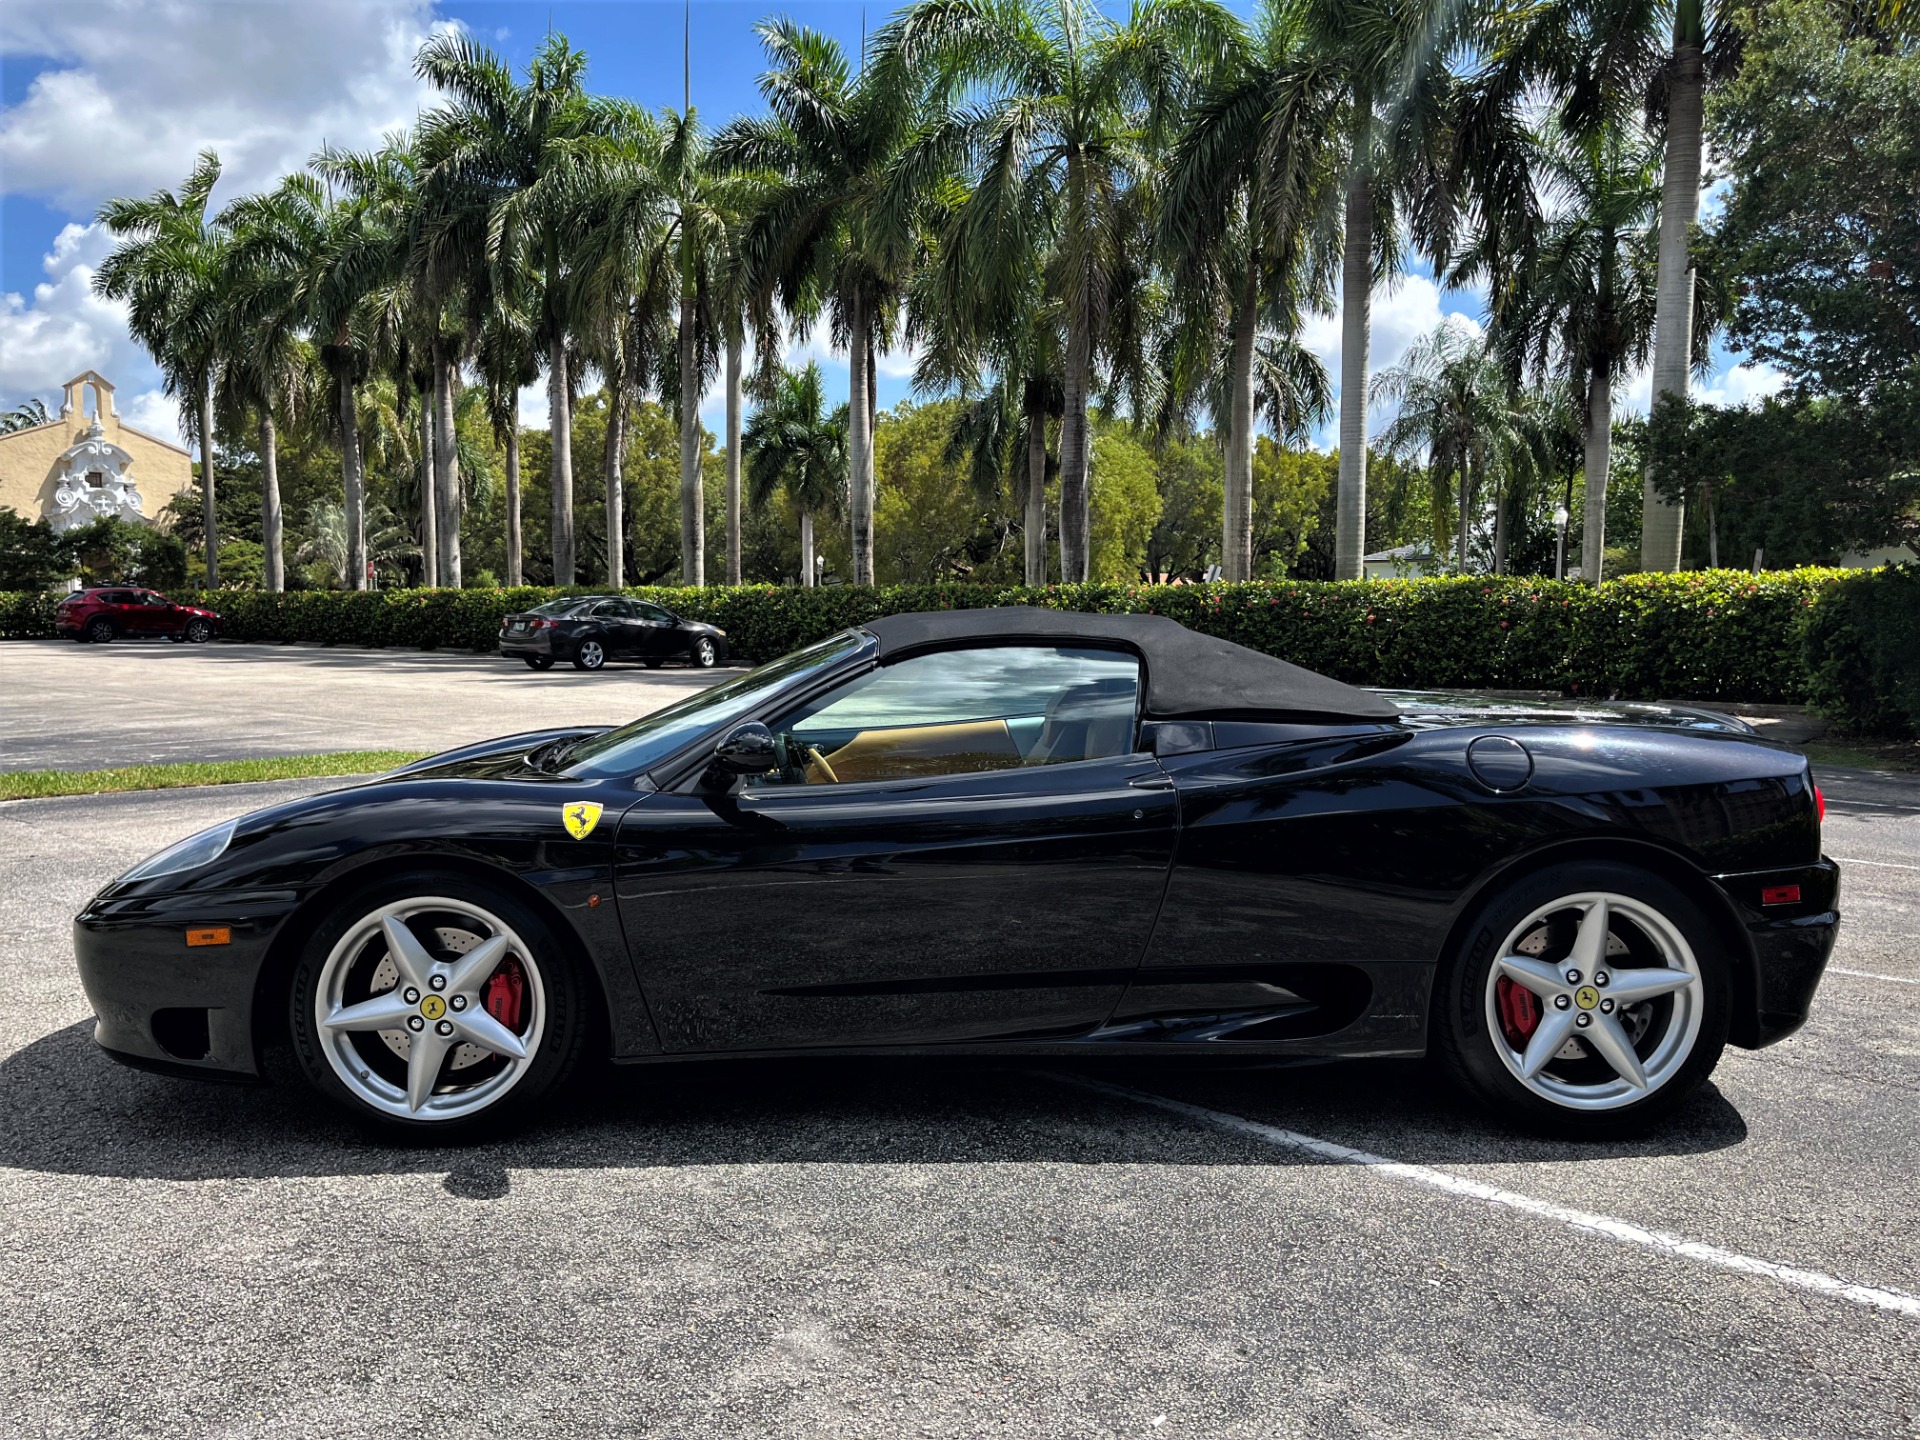 Used 2003 Ferrari 360 Spider for sale $98,850 at The Gables Sports Cars in Miami FL 33146 3